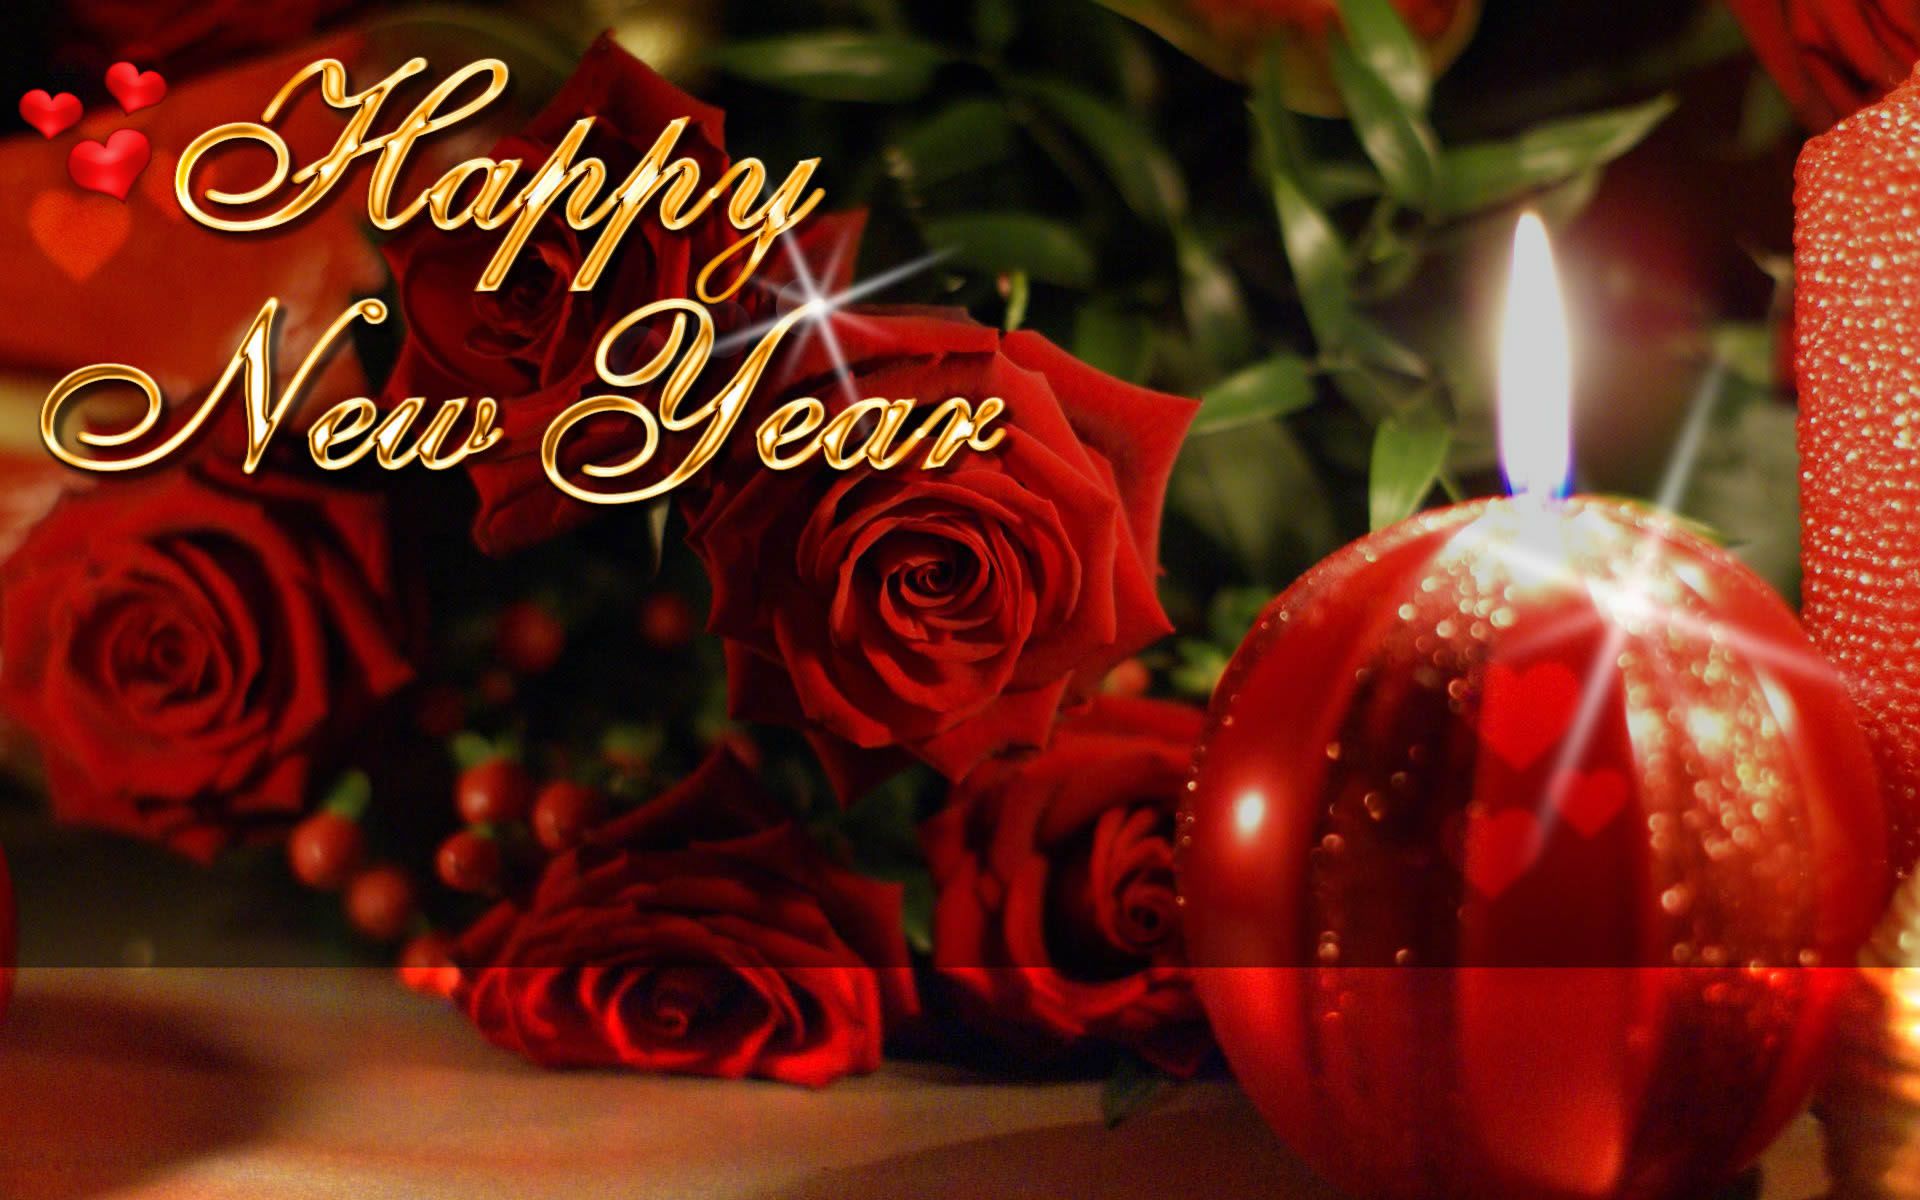 Happy New Year 2021 Greeting Cards Red Roses Candle Love Wallpaper HD 1920x1200, Wallpaper13.com